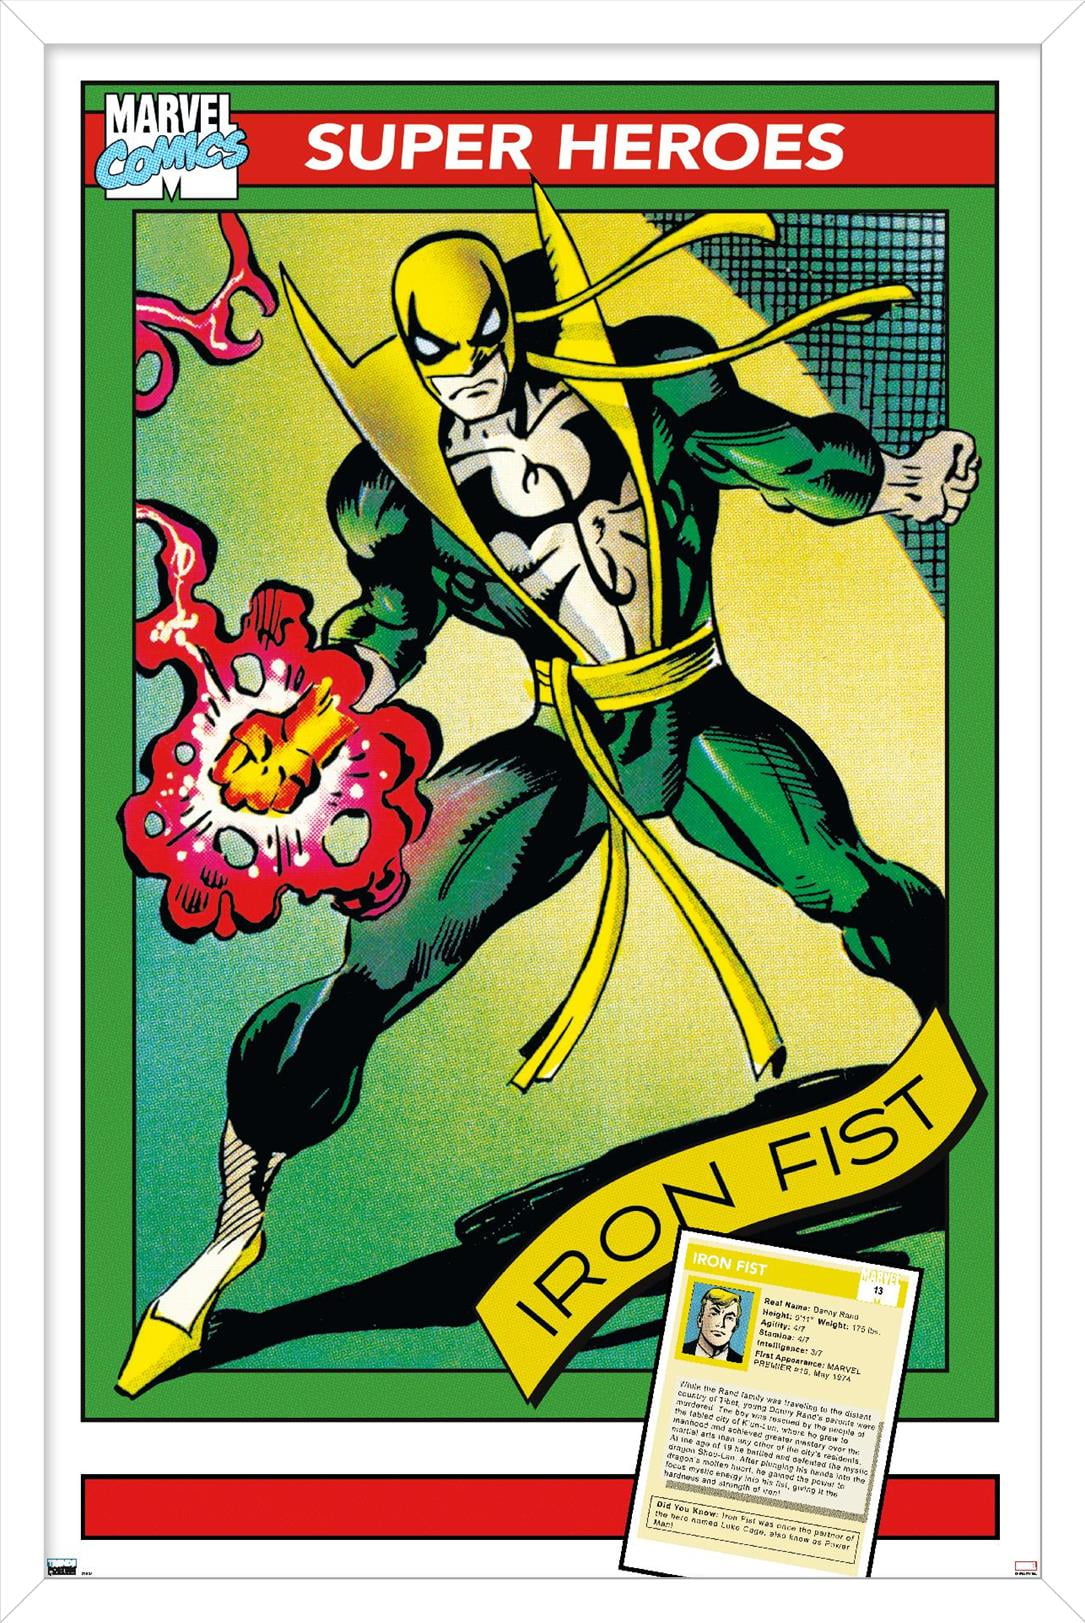 Iron Fist 🤜🏻Póster Epic Yellow Sun and Clouds ⛅️ BVE